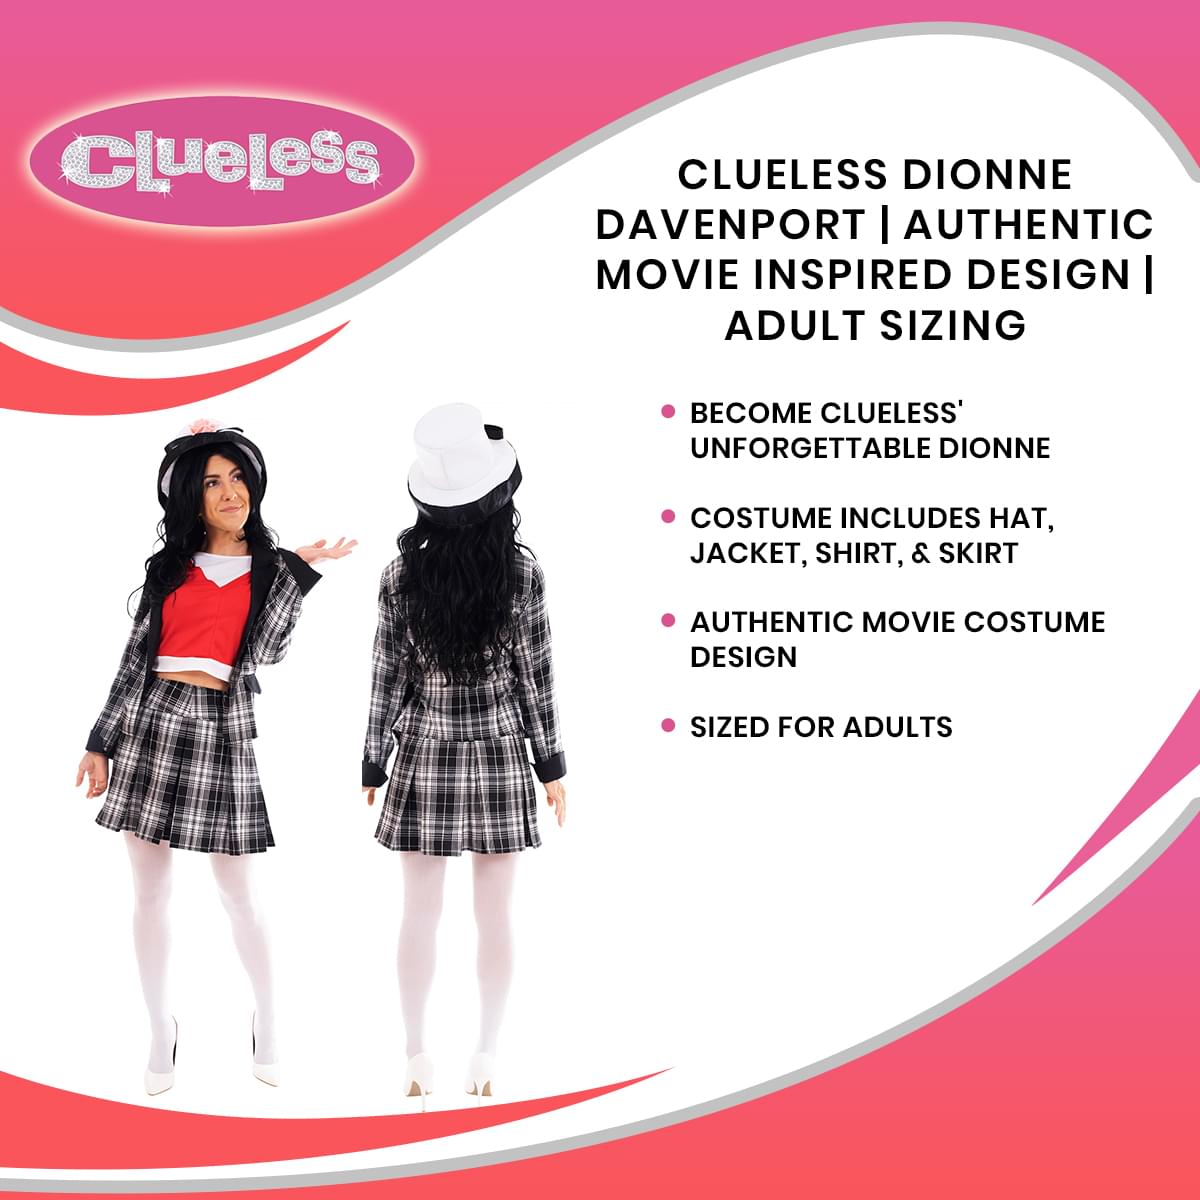 Clueless Dionne Davenport | Authentic Movie Inspired Design | Sized For Adults